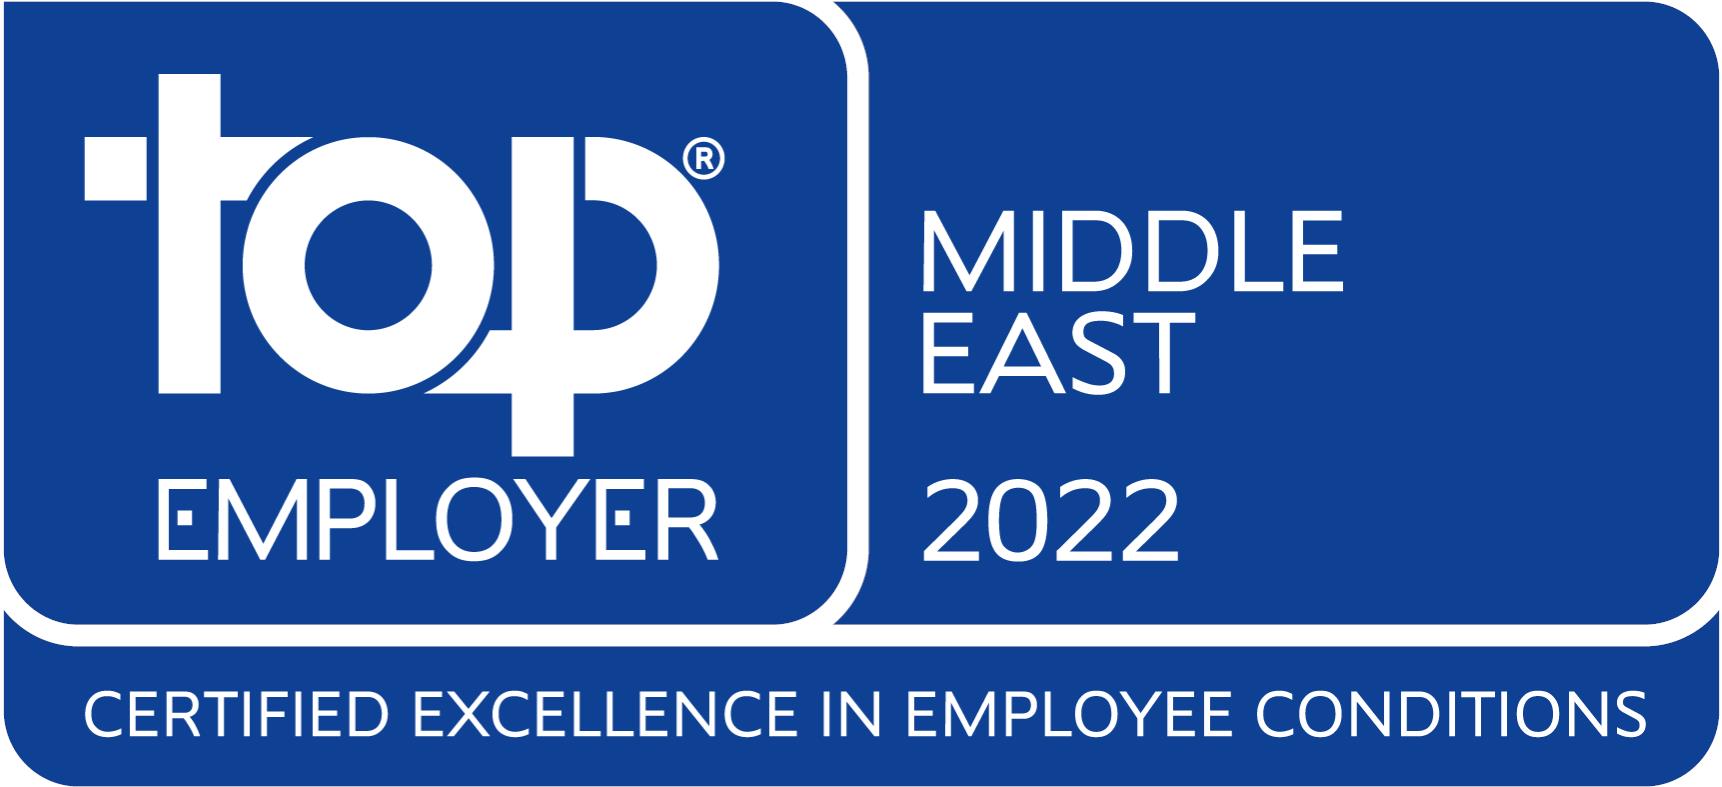 Top_Employer_Middle_East_2022.png